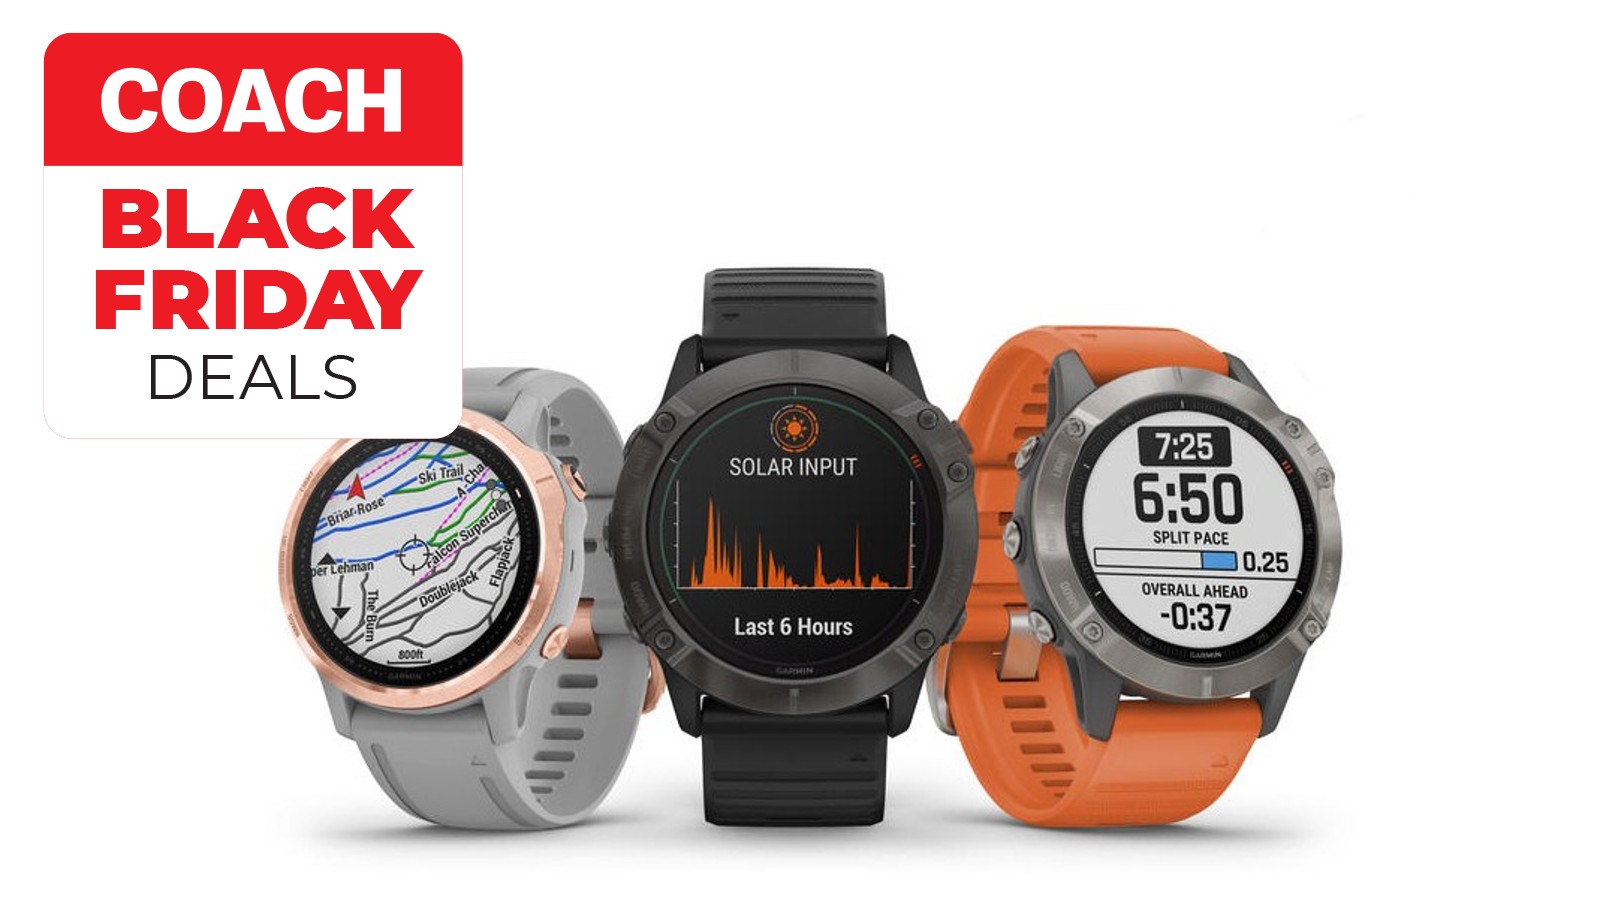 Discriminerend Toepassing Verbanning Read This Before Buying A Garmin Fenix 6 Pro In The Black Friday Sales |  Coach